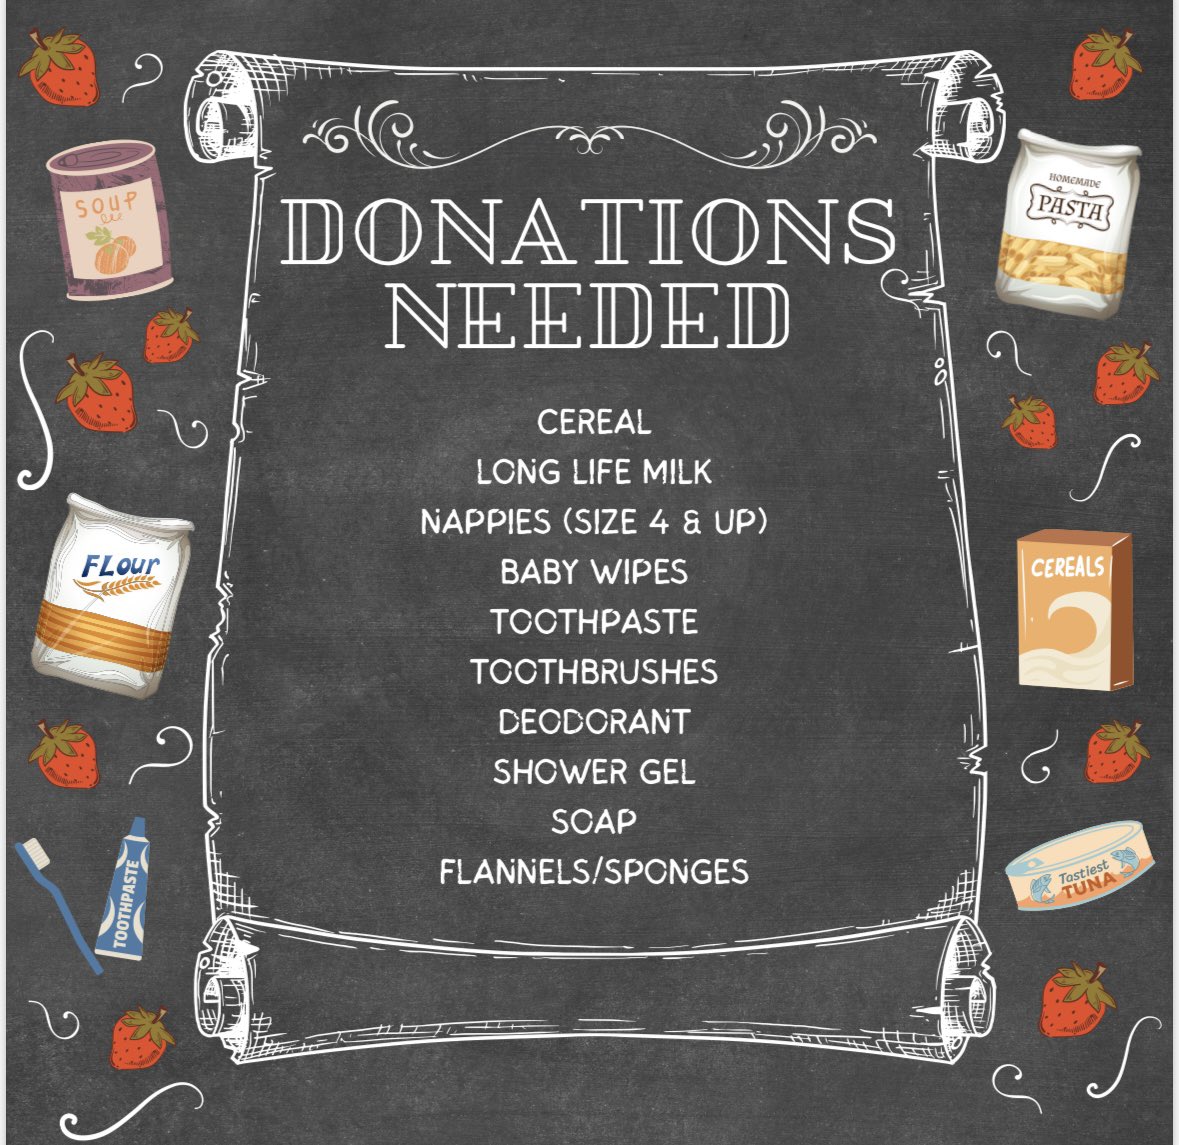 Our food share project is in full swing! But we need your support to keep the momentum going! We have created a list of essential items needed for our food parcels, check it out and donate what you can! #foodshare #charity #giveback #community